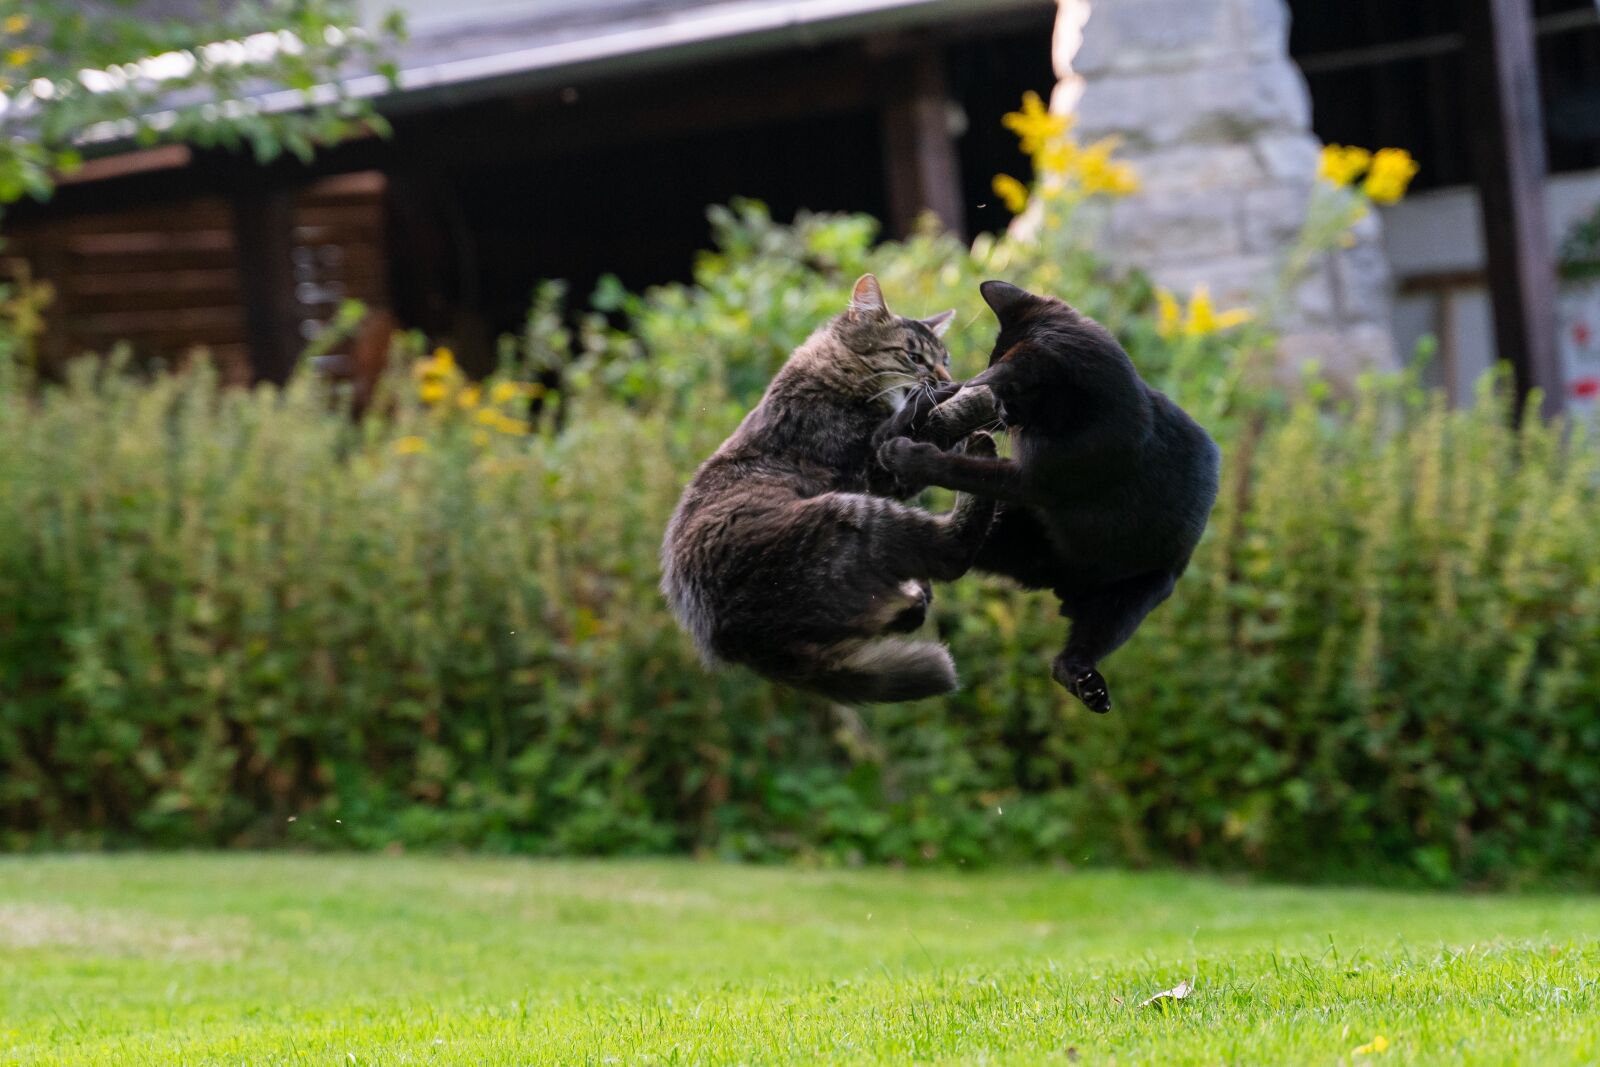 Sony a7 II + Tamron 28-75mm F2.8 Di III RXD sample photo. Fight, play, cat photography